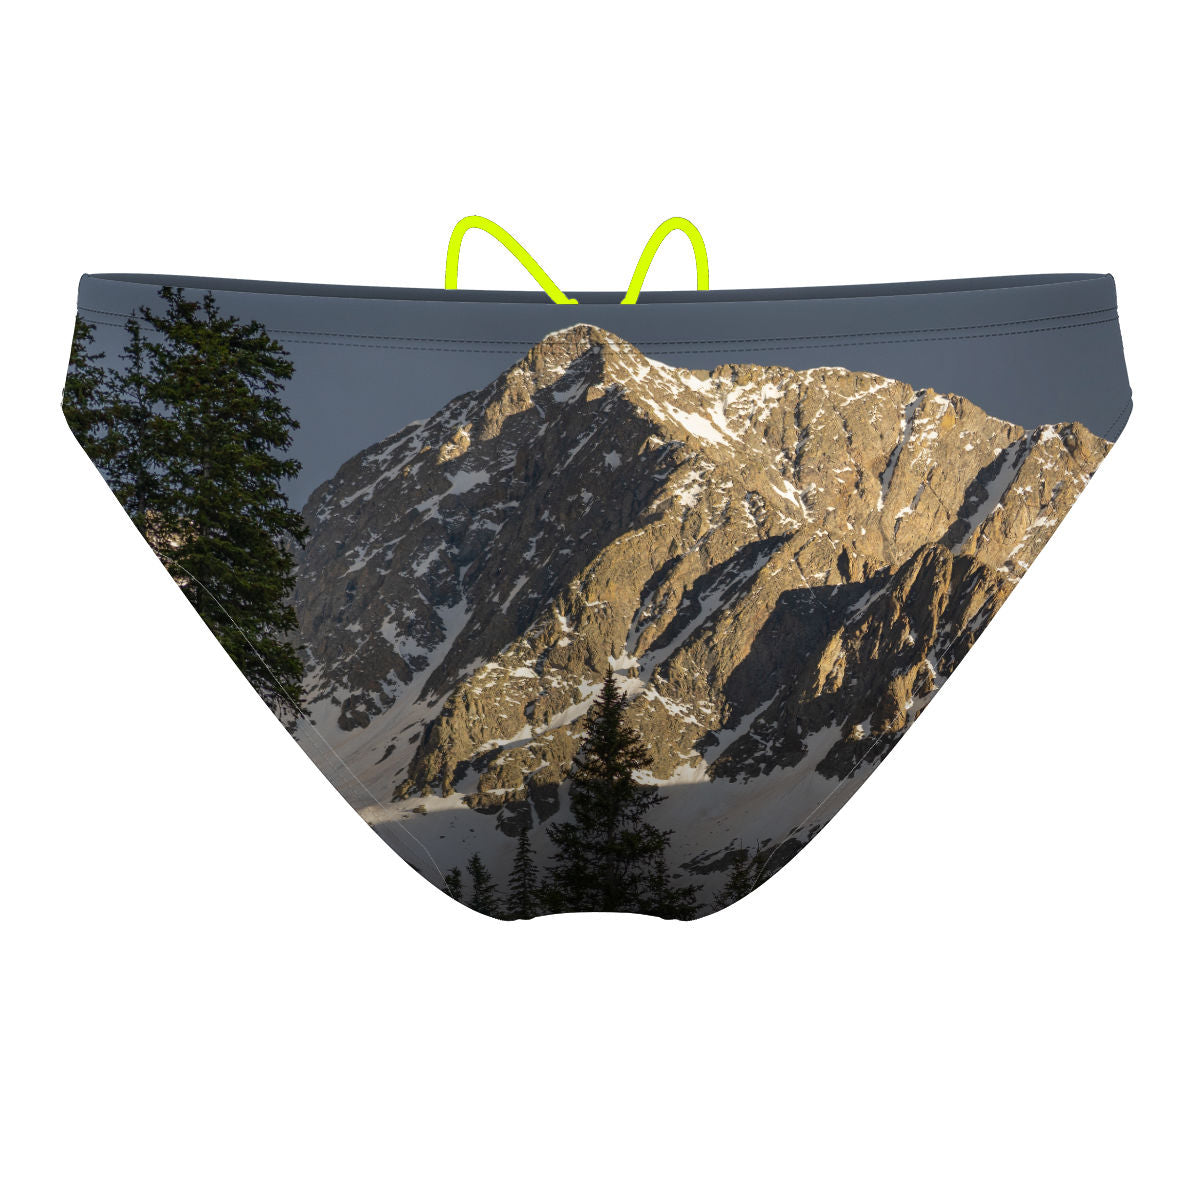 04/25/2022 - Waterpolo Brief Swimsuit